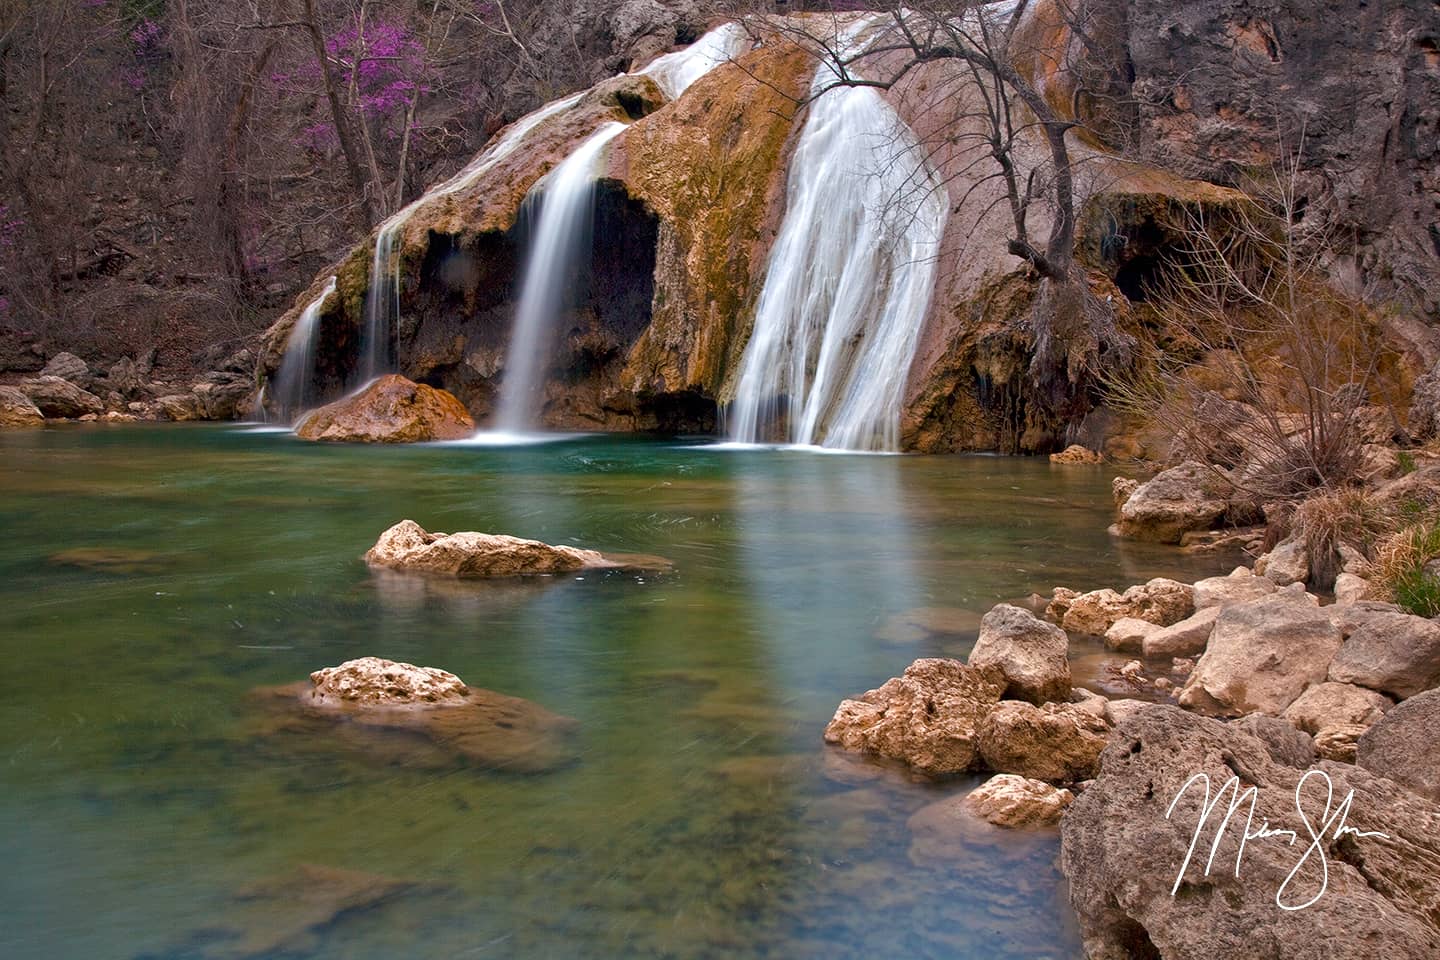 A Hint of Spring at Turner Falls - Turner Falls, Arbuckle Wilderness, Oklahoma